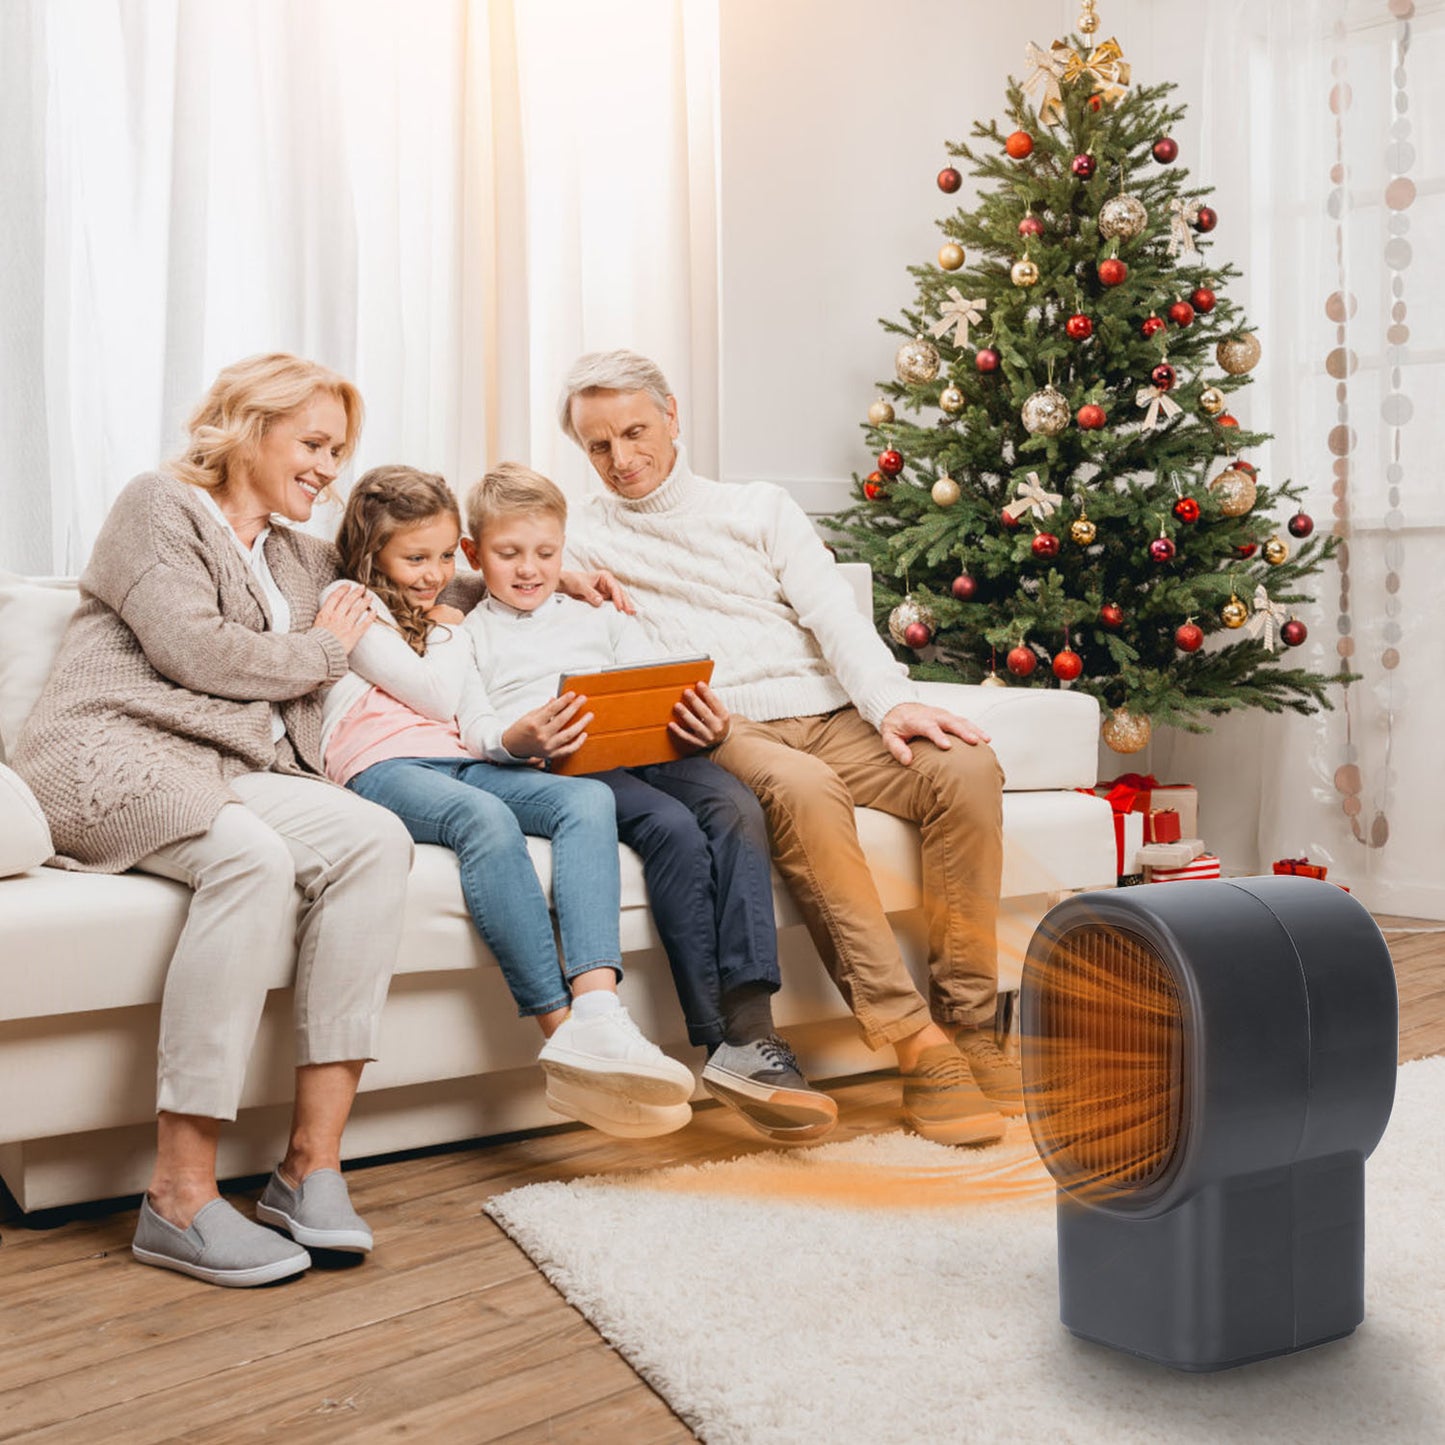 500W Portable Electric Space Heater